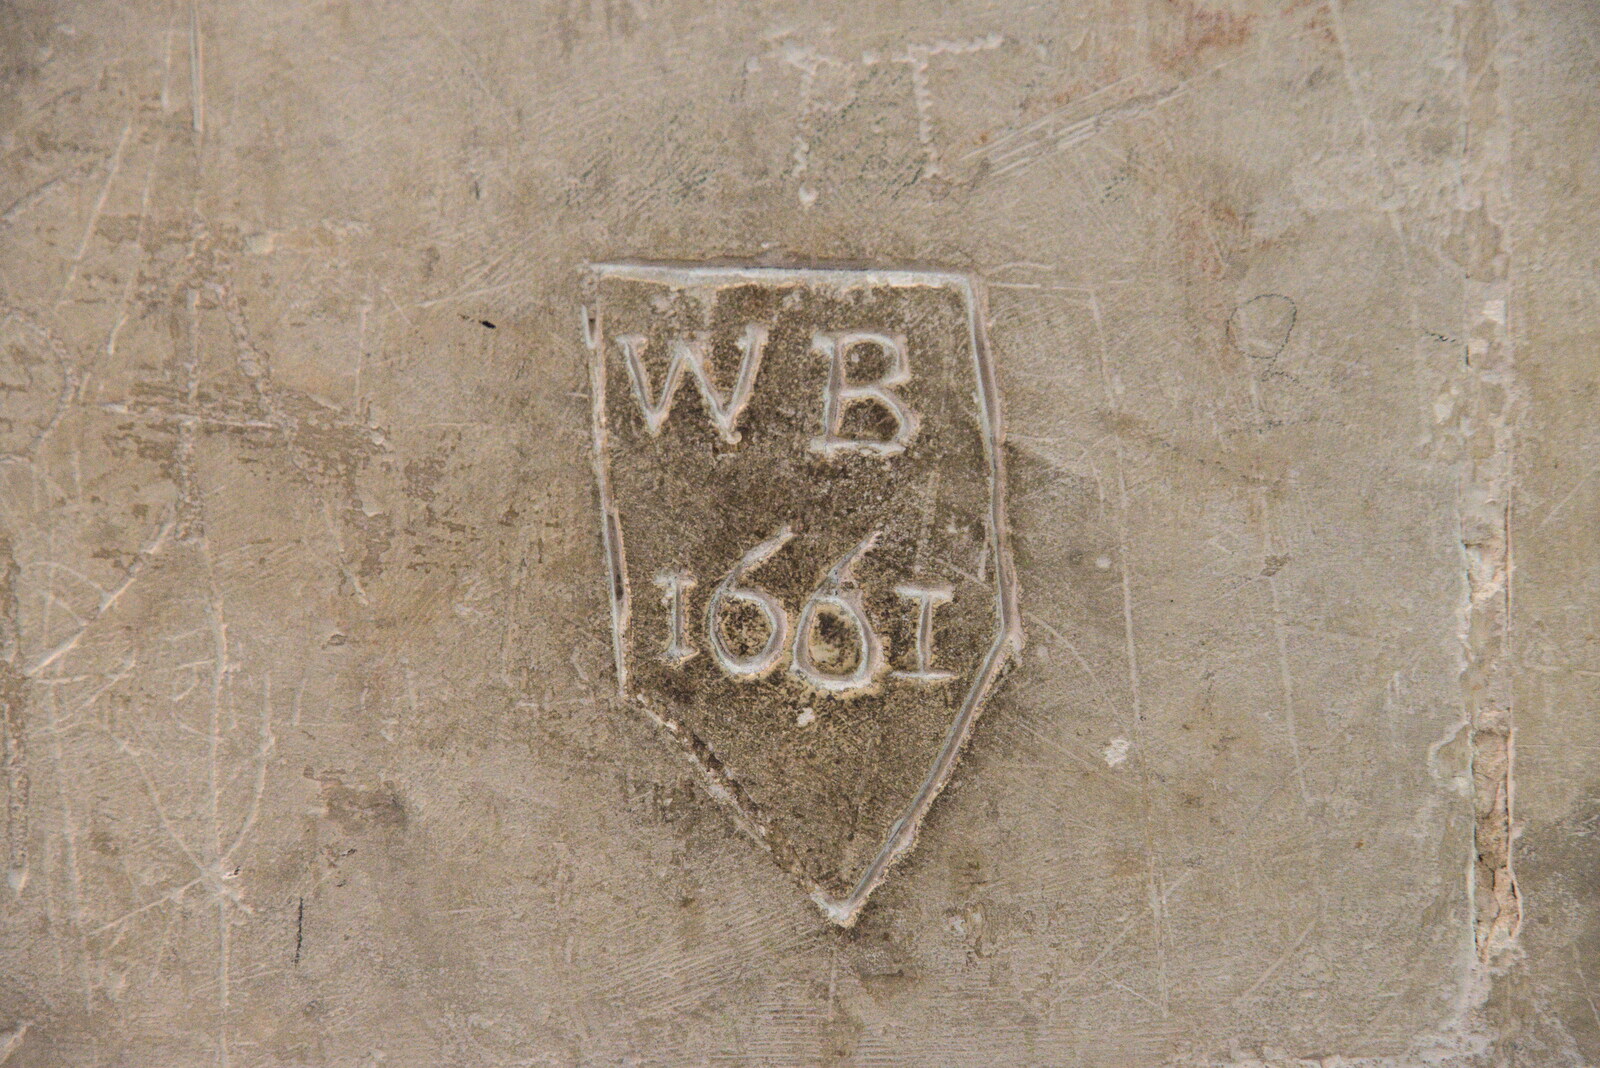 Graffiti from 1661 from Dippy and the City Dinosaur Trail, Norwich, Norfolk - 19th August 2021